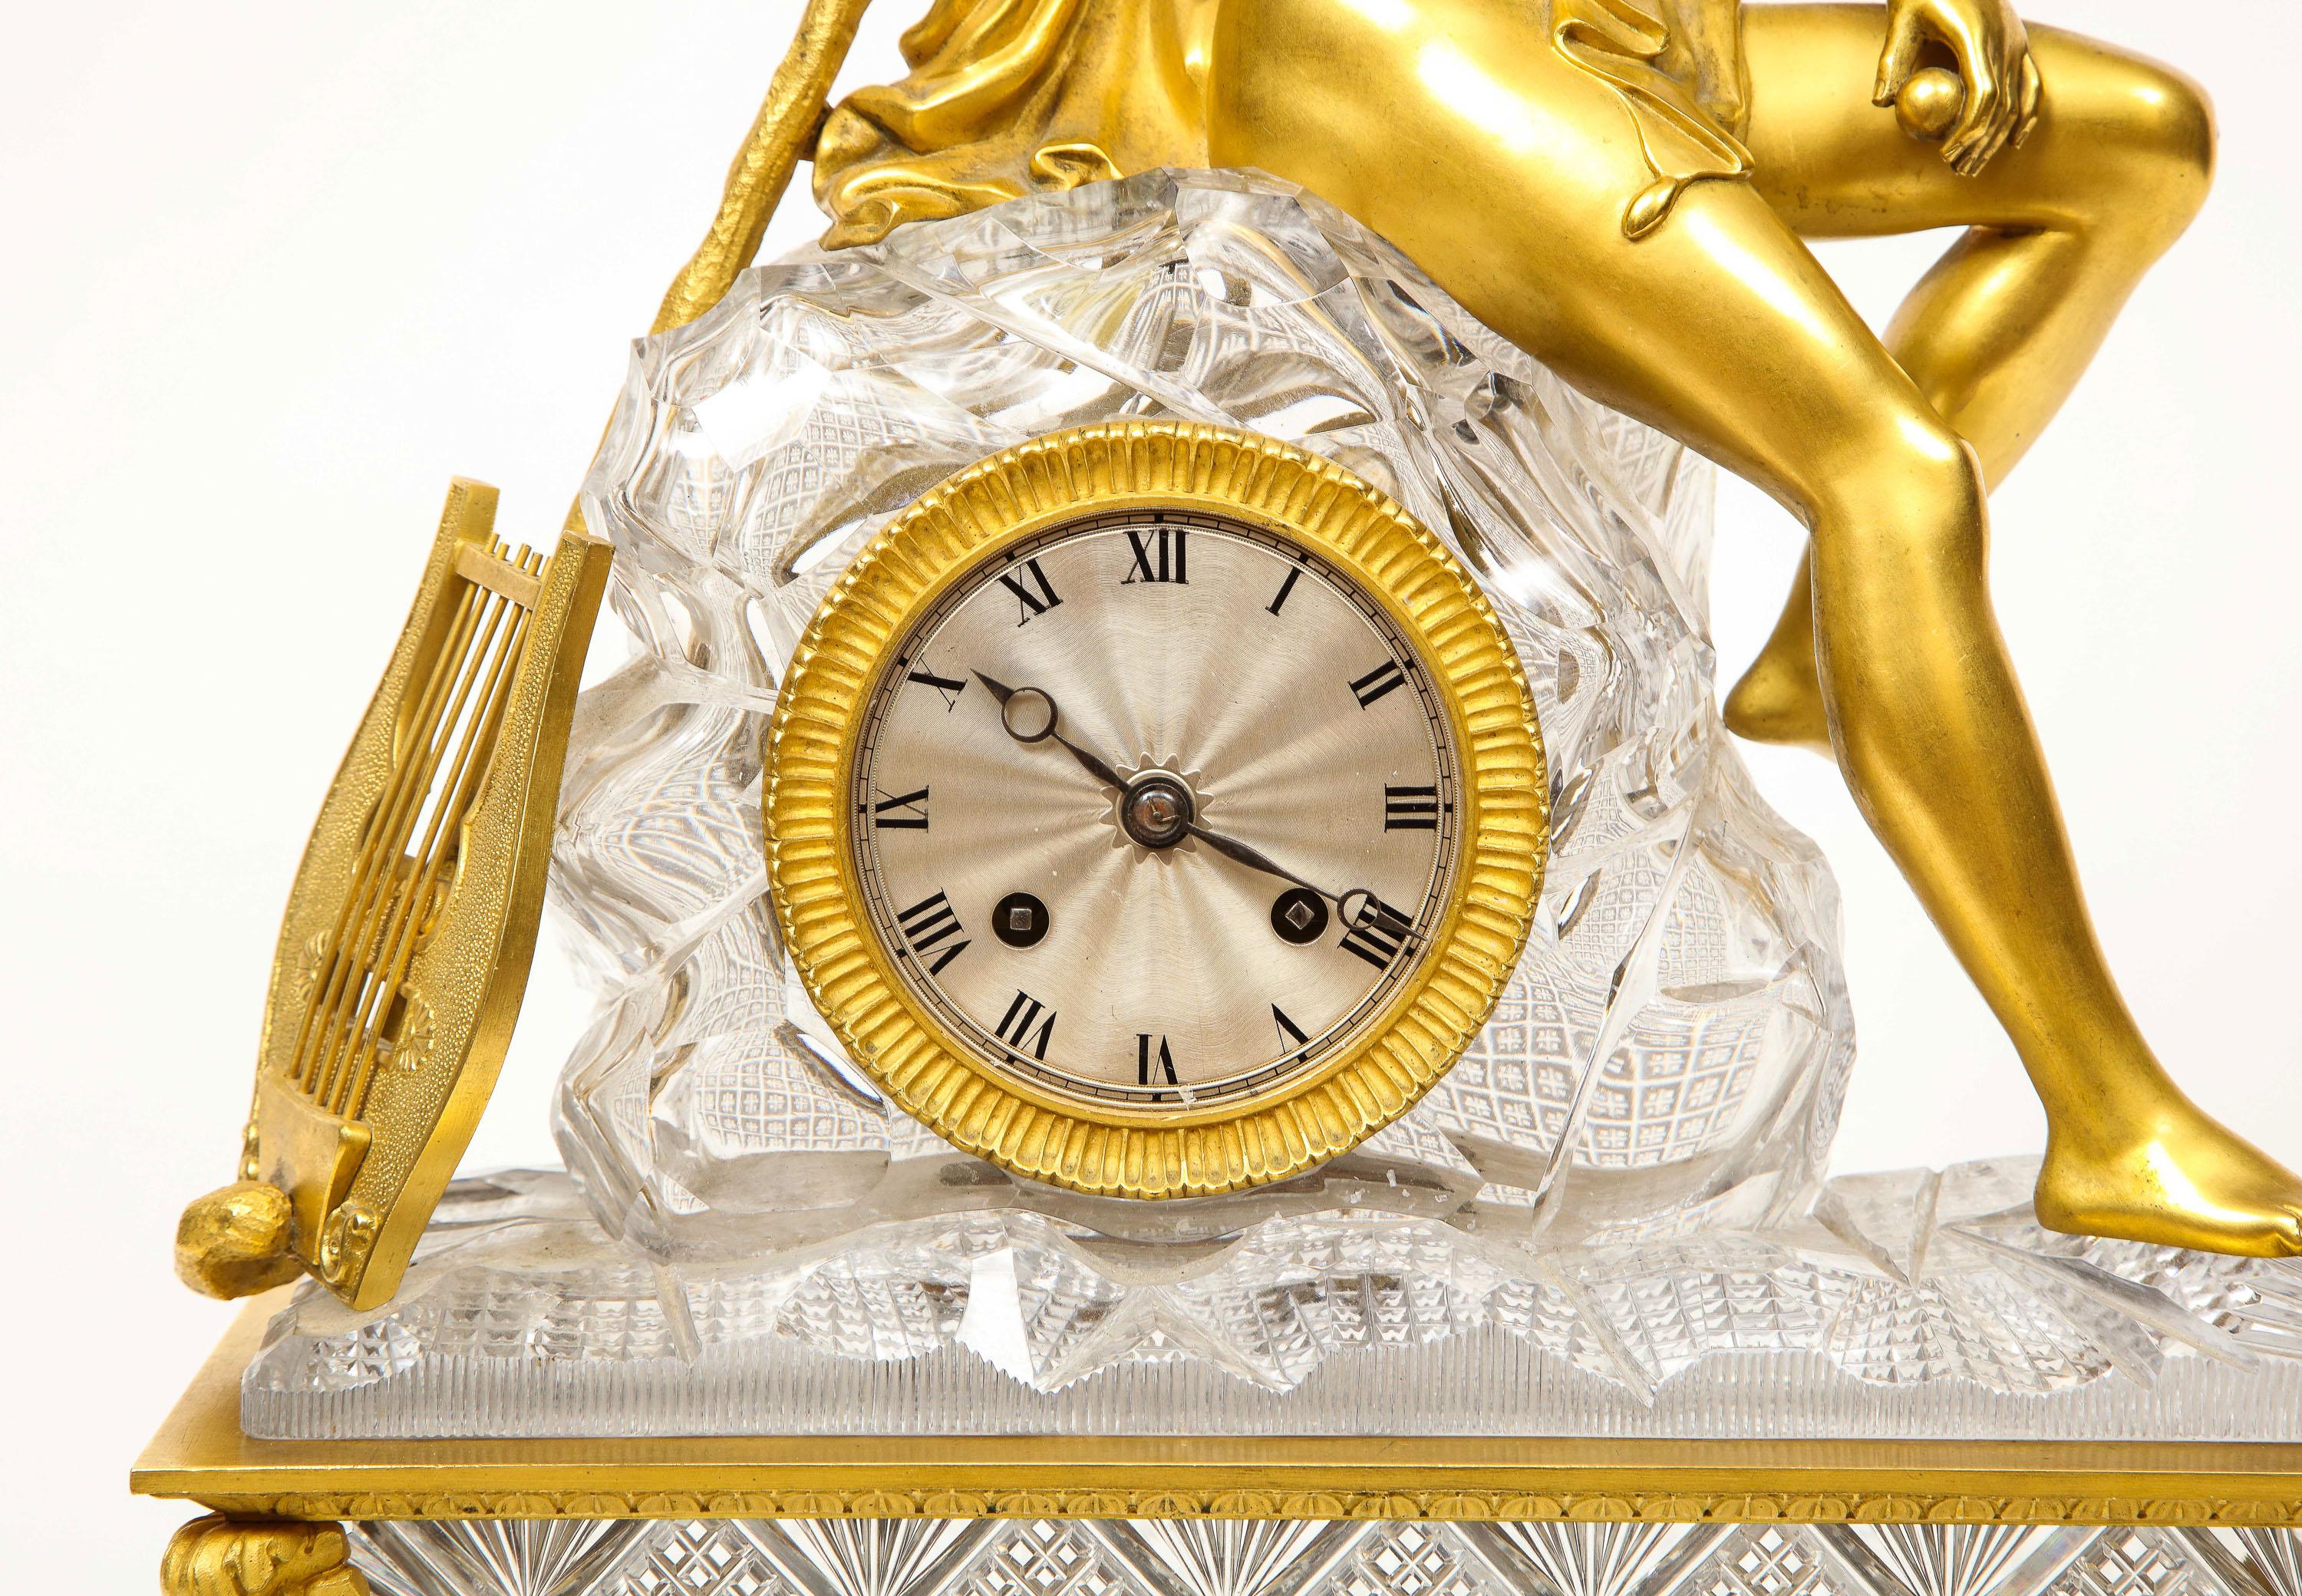 Exquisite French Empire Ormolu and Cut-Crystal Clock, c. 1815 For Sale 2